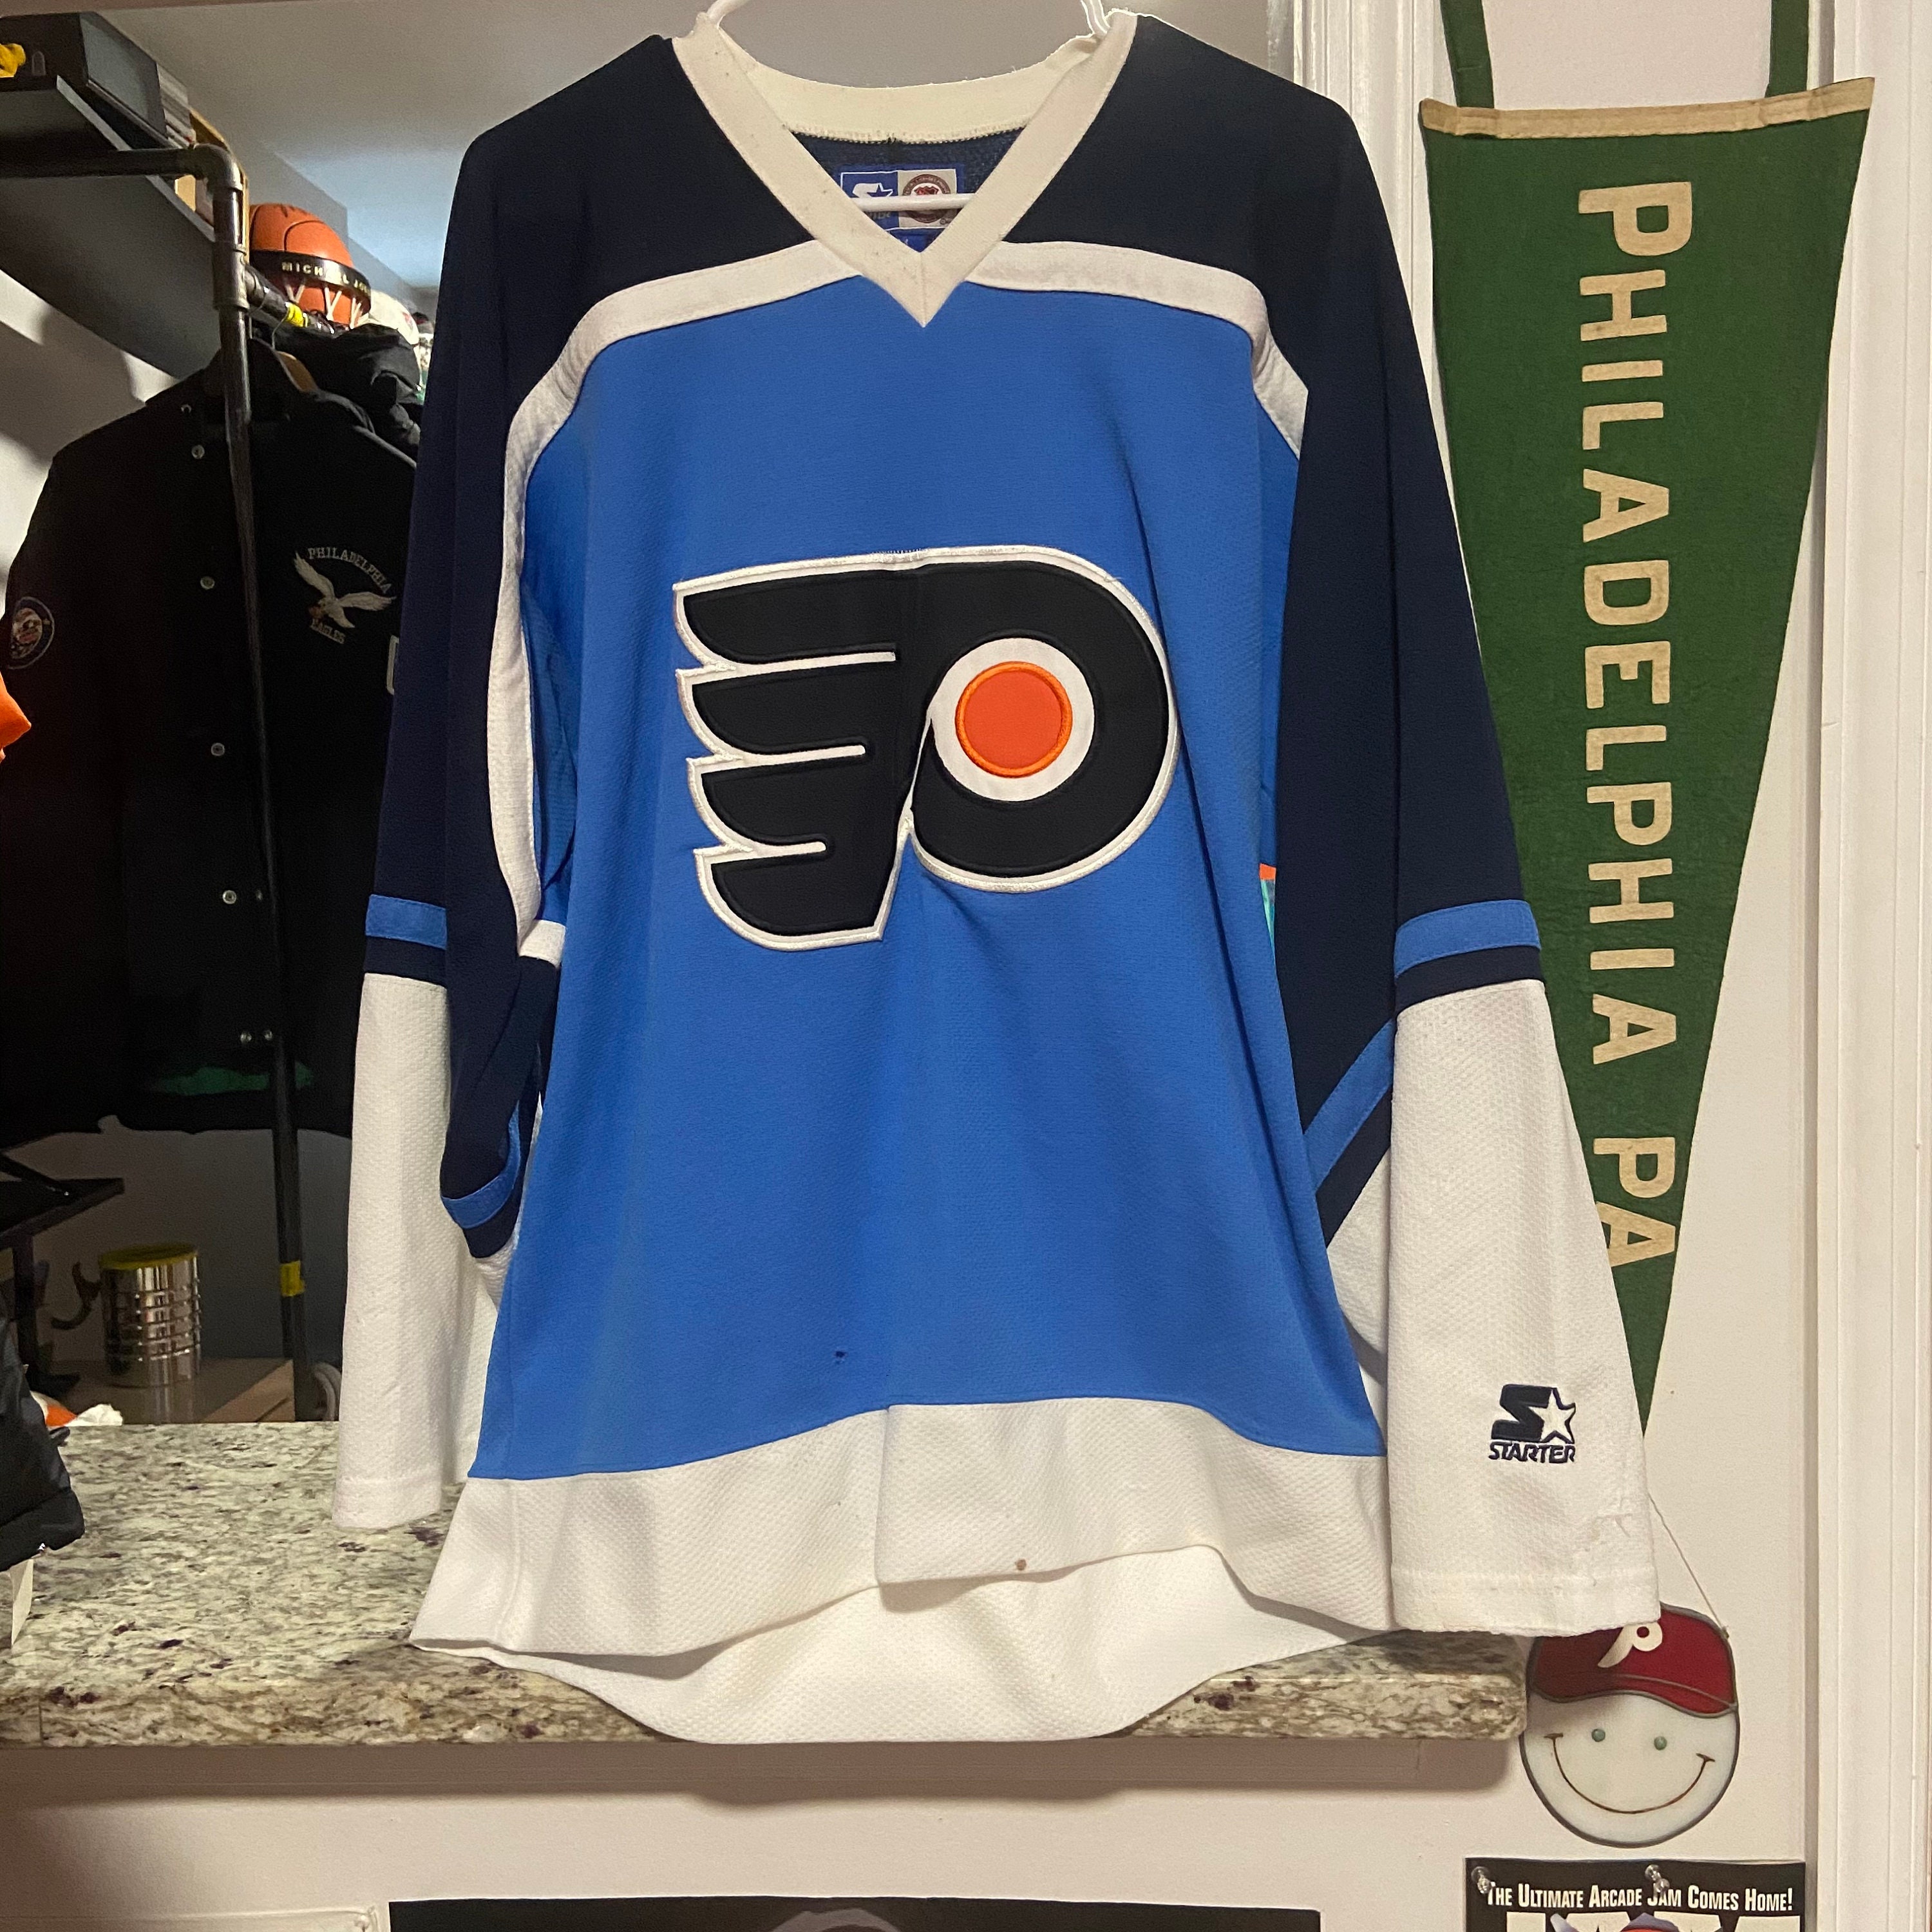 RARE! AUTHENTIC VINTAGE ERIC LINDROS FLYERS HOCKEY JERSEY LARGE STARTER